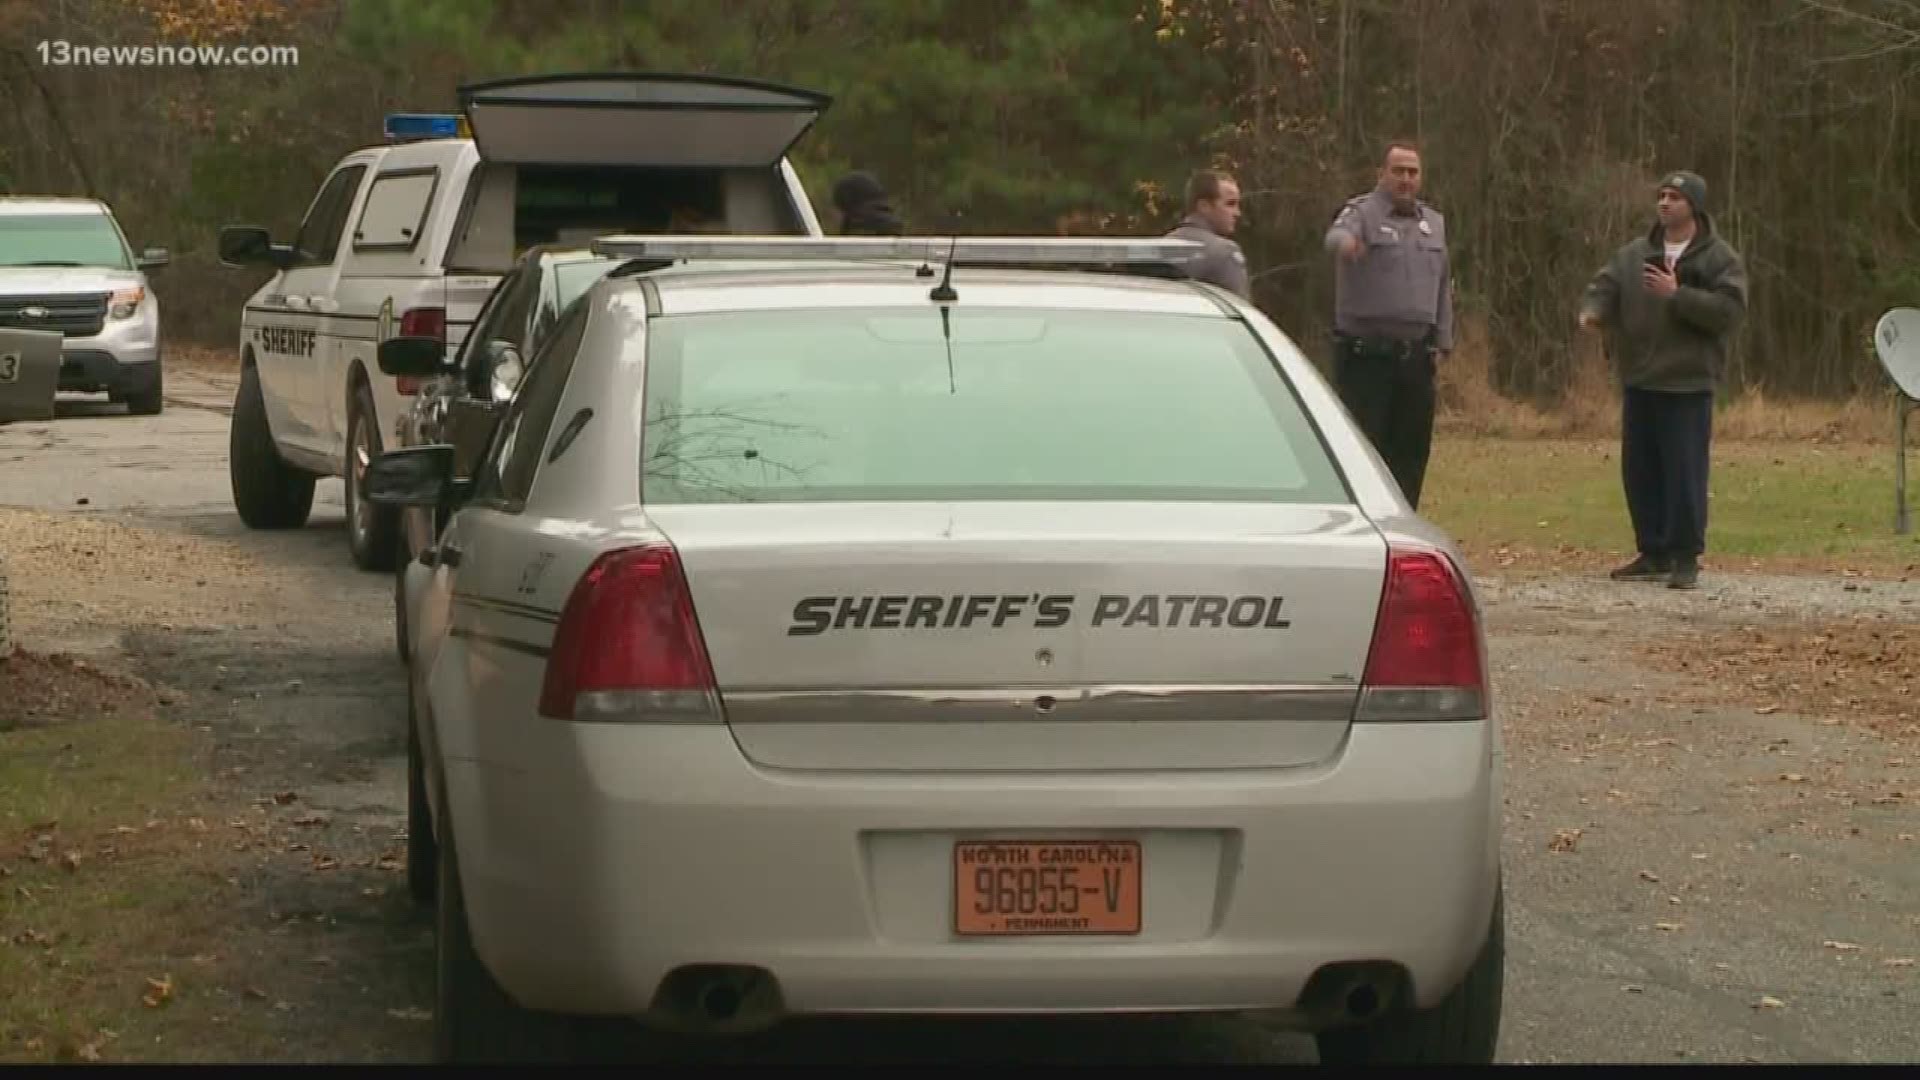 A man is in police custody after being accused of murdering his roommate in Currituck County.